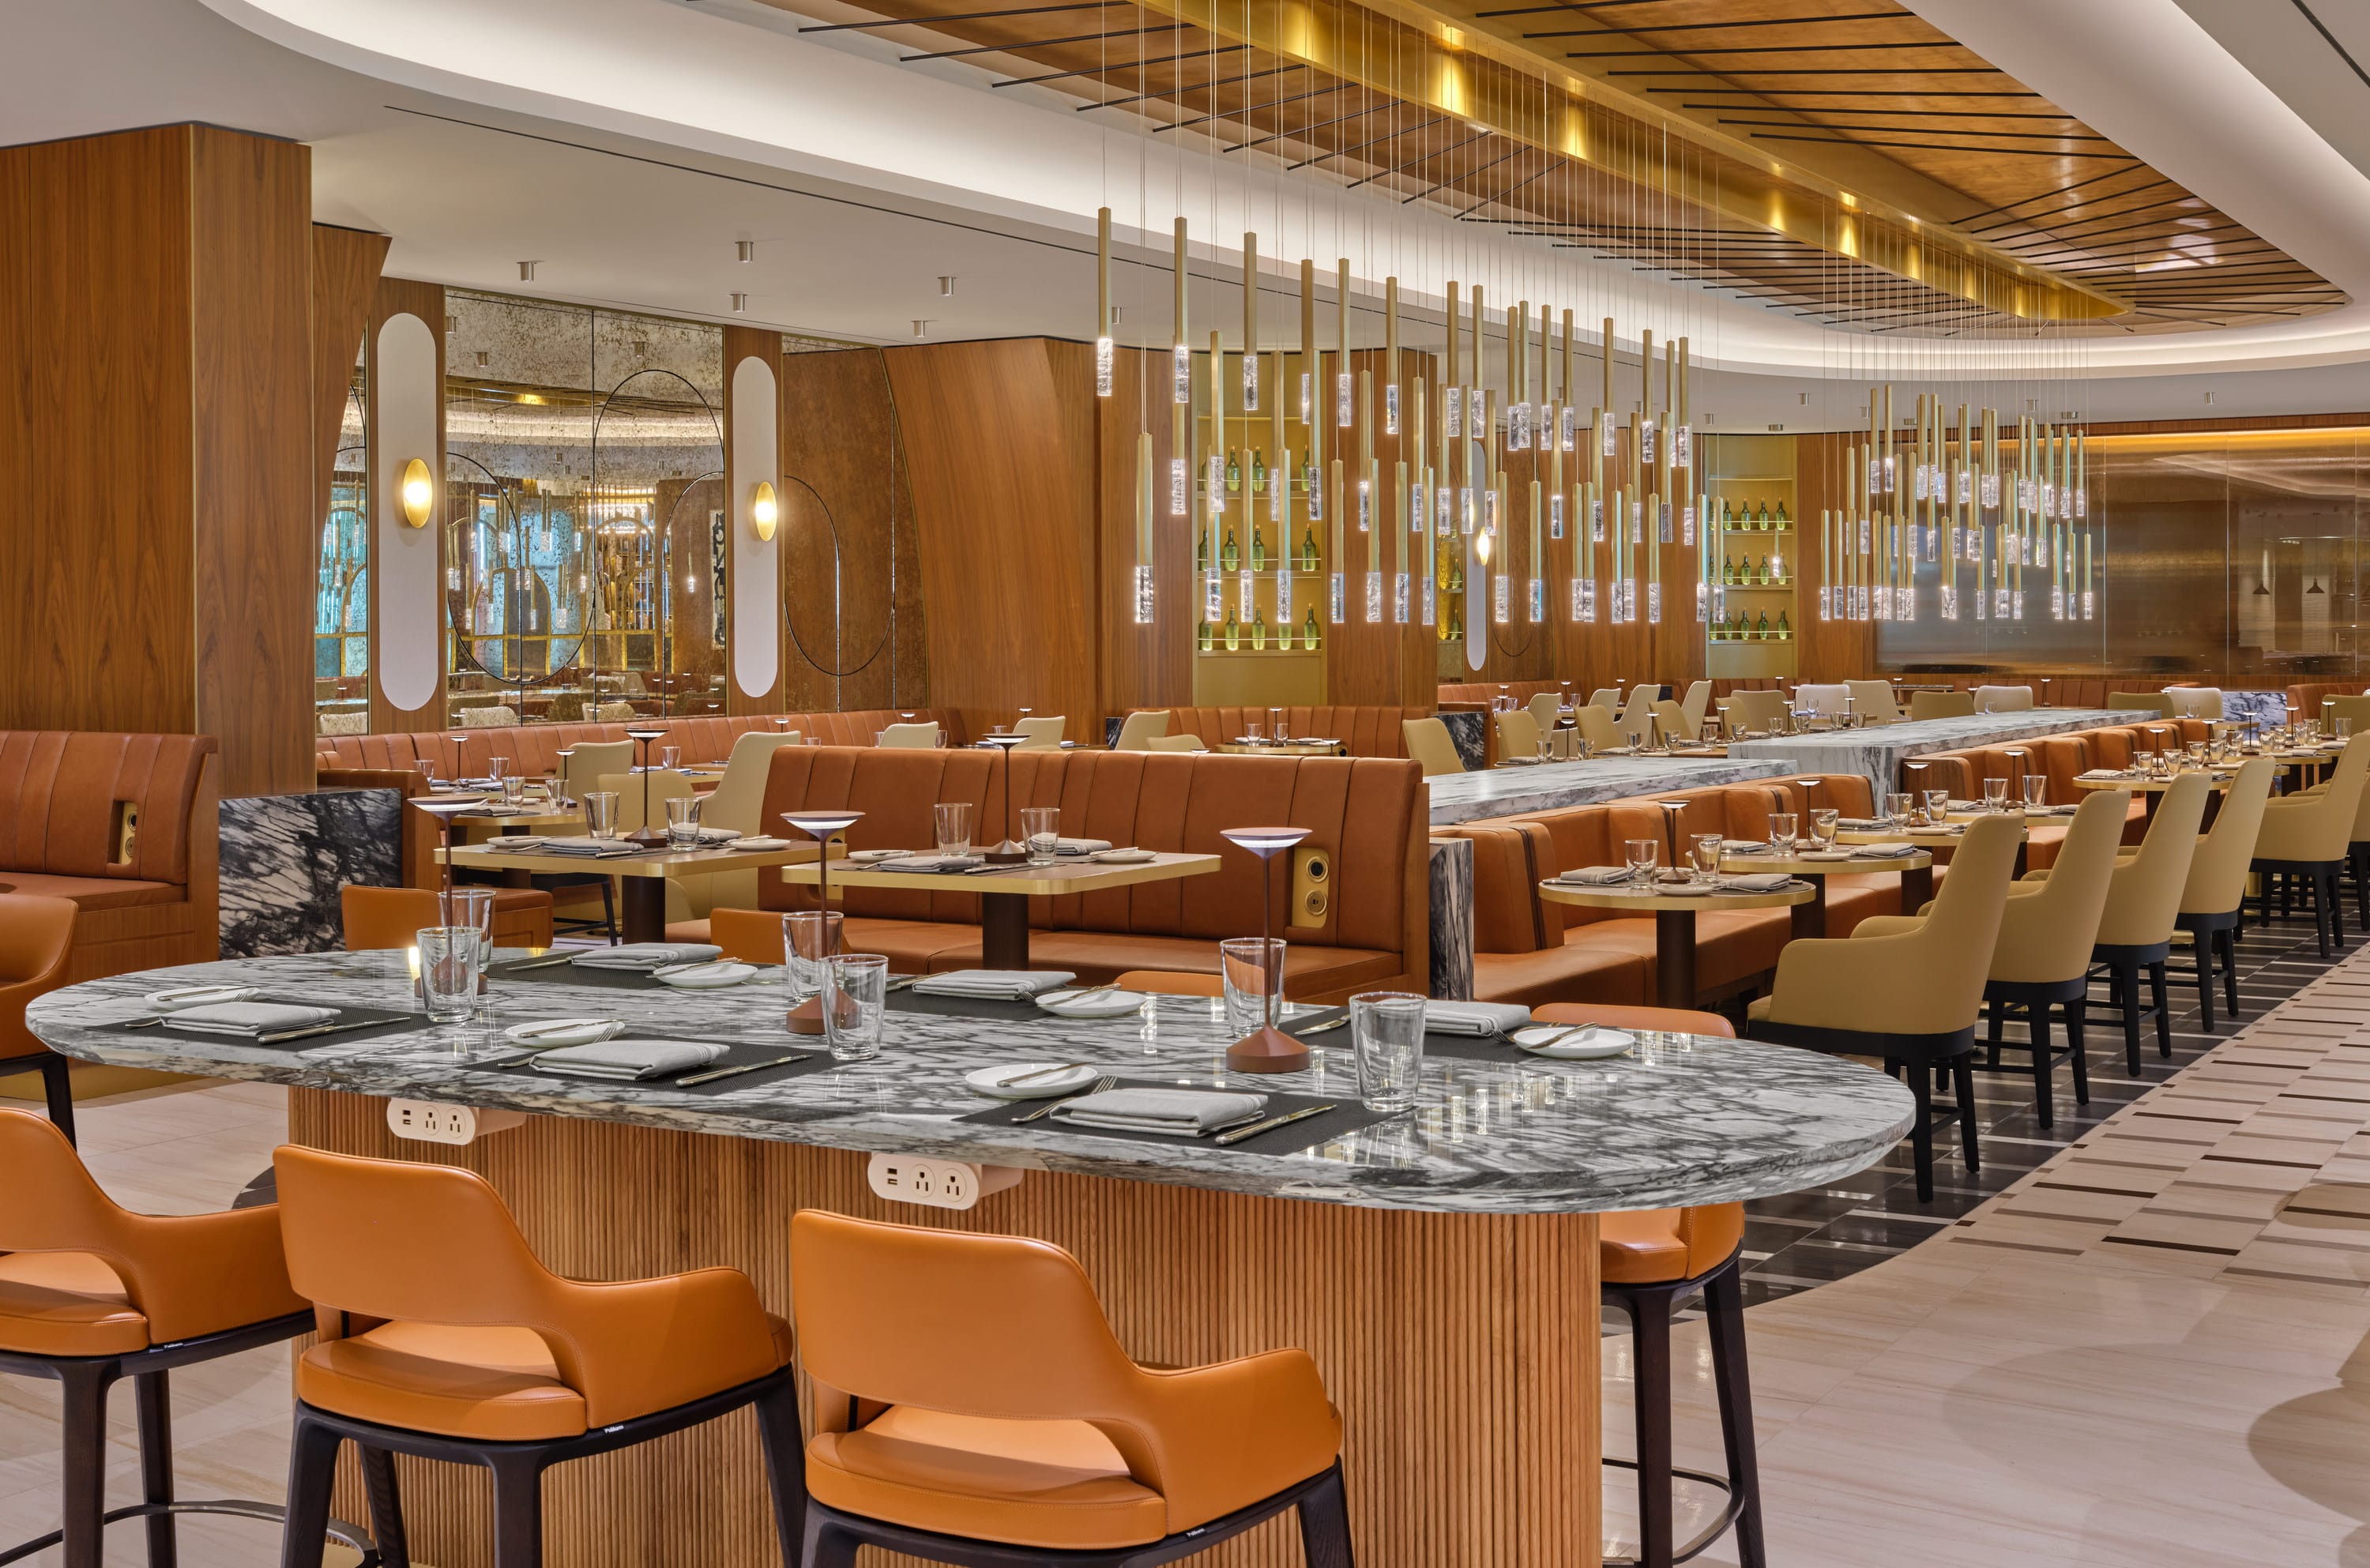 The brasserie at the Delta One Lounge JFK features table service and a generous hot buffet.